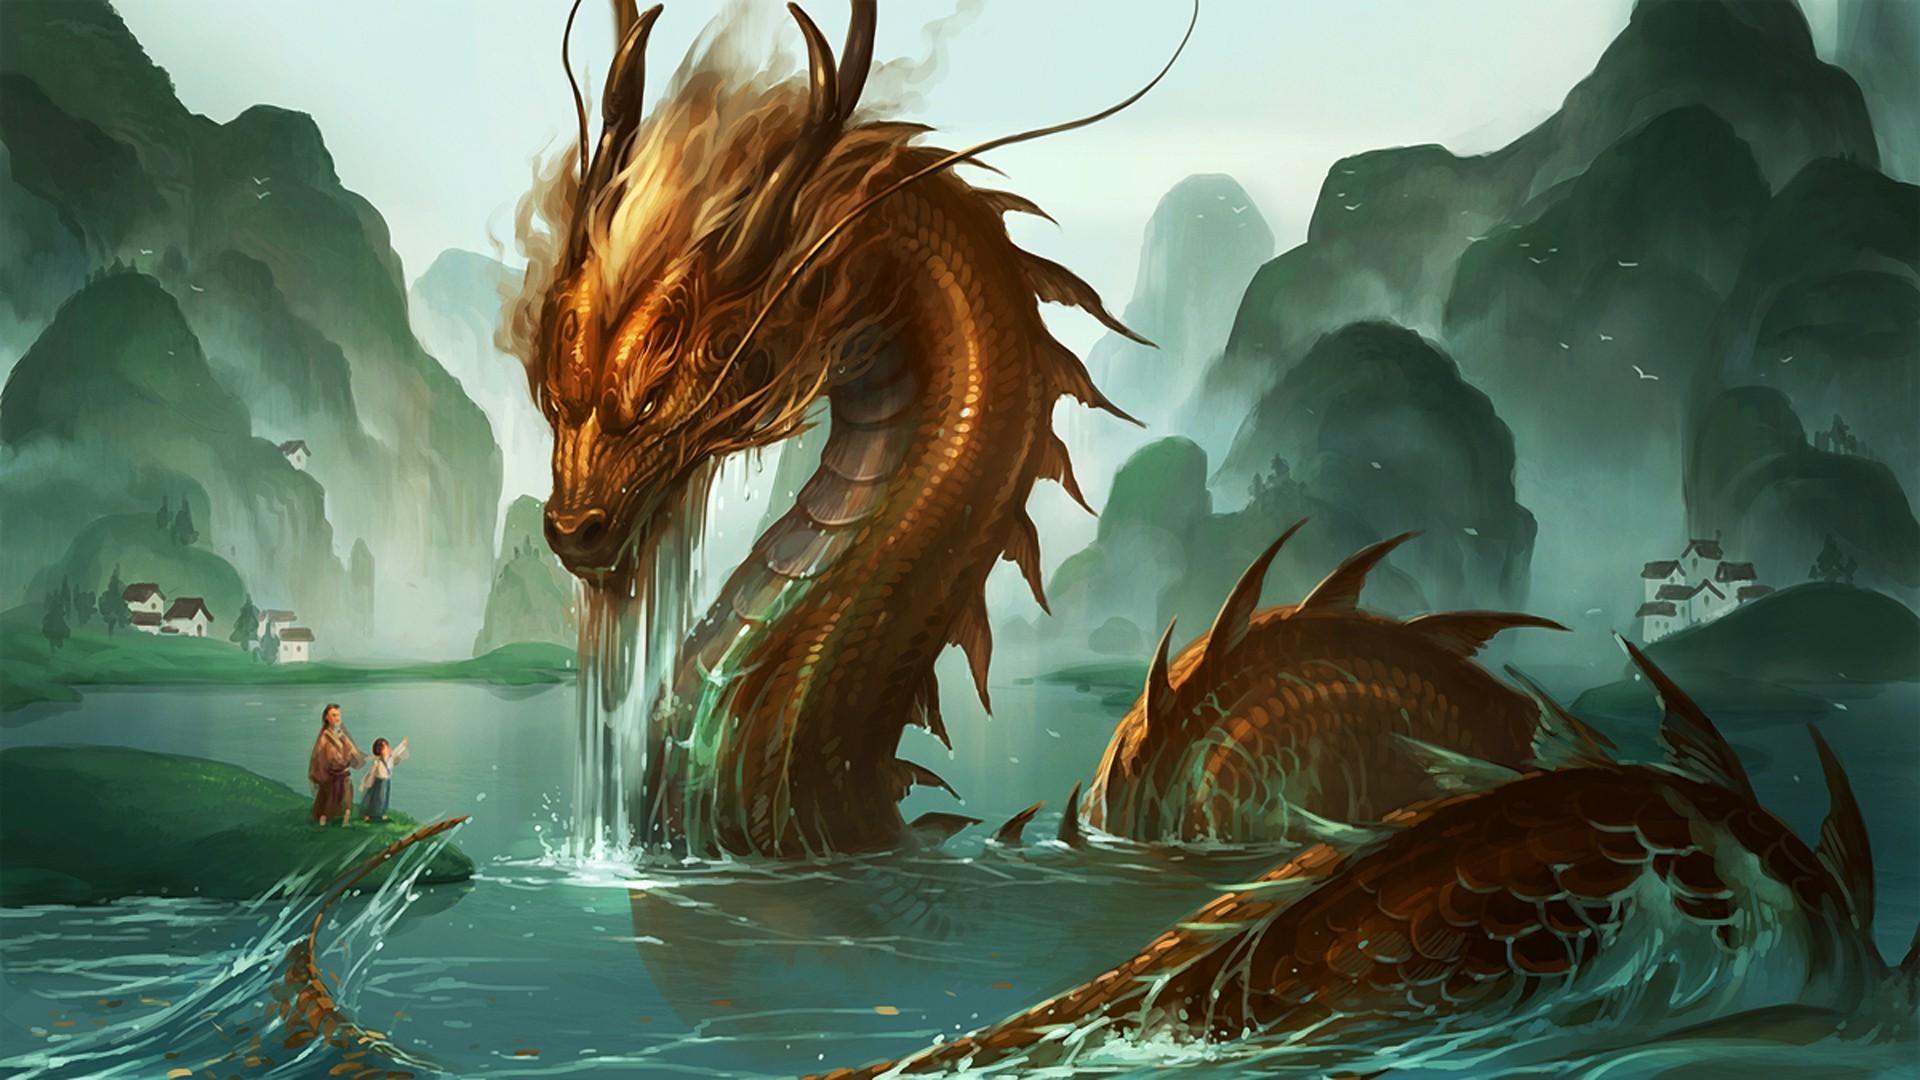 The dragon rises out of the water - Phone wallpapers